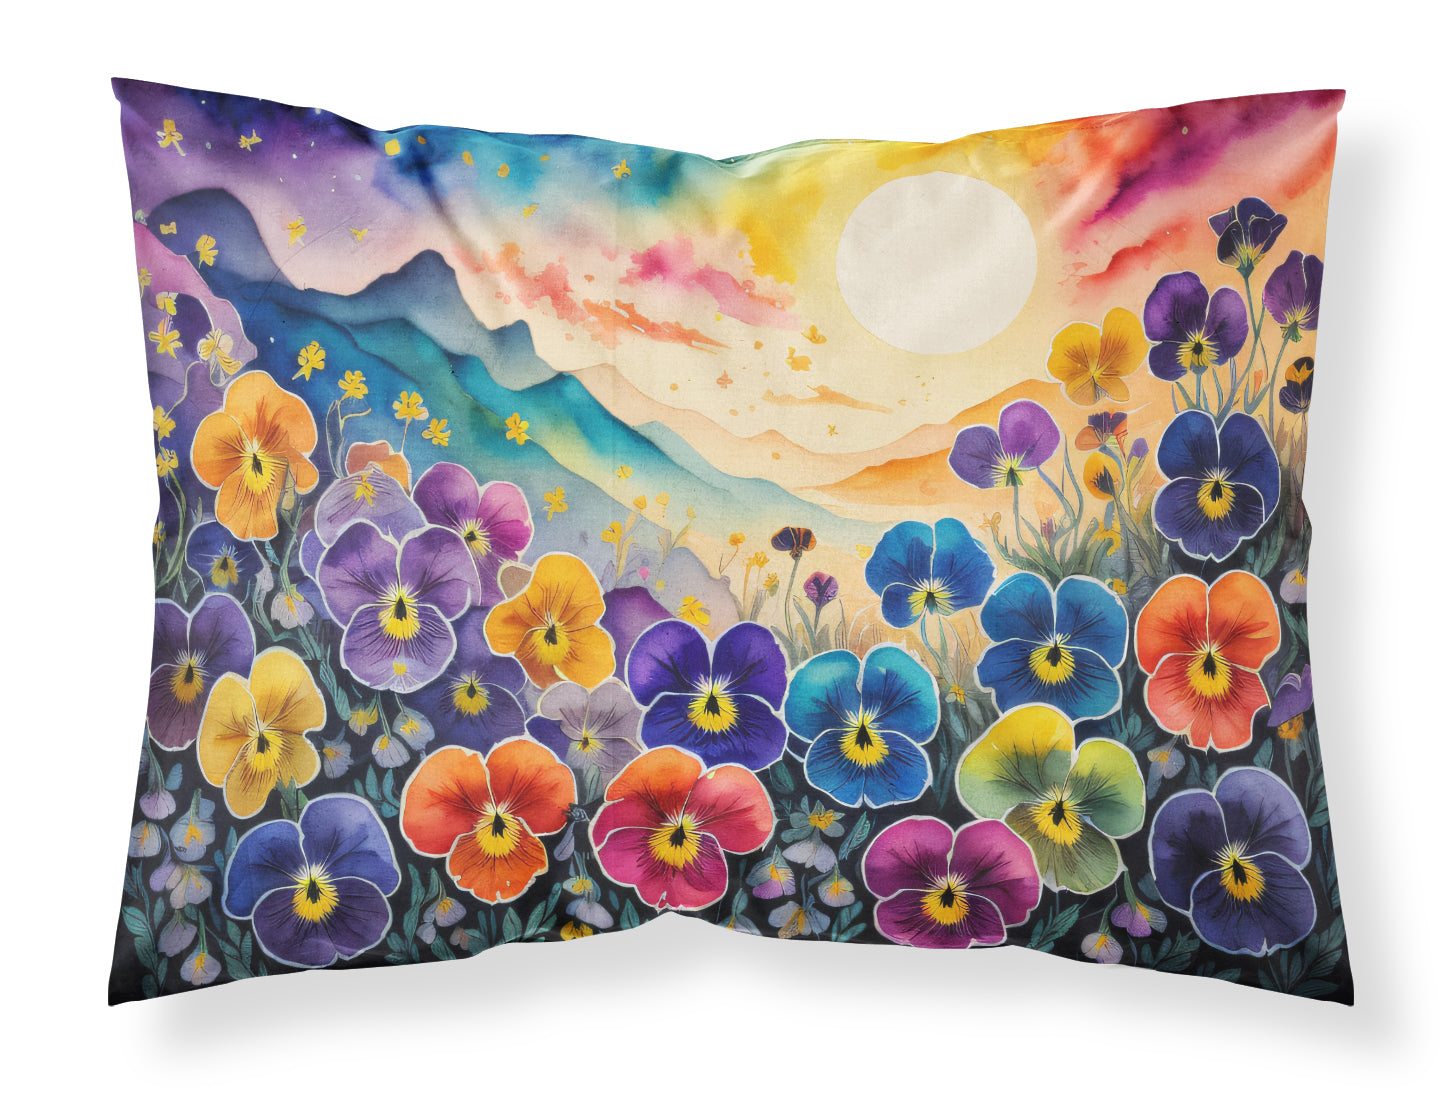 Buy this Pansies in Color Fabric Standard Pillowcase